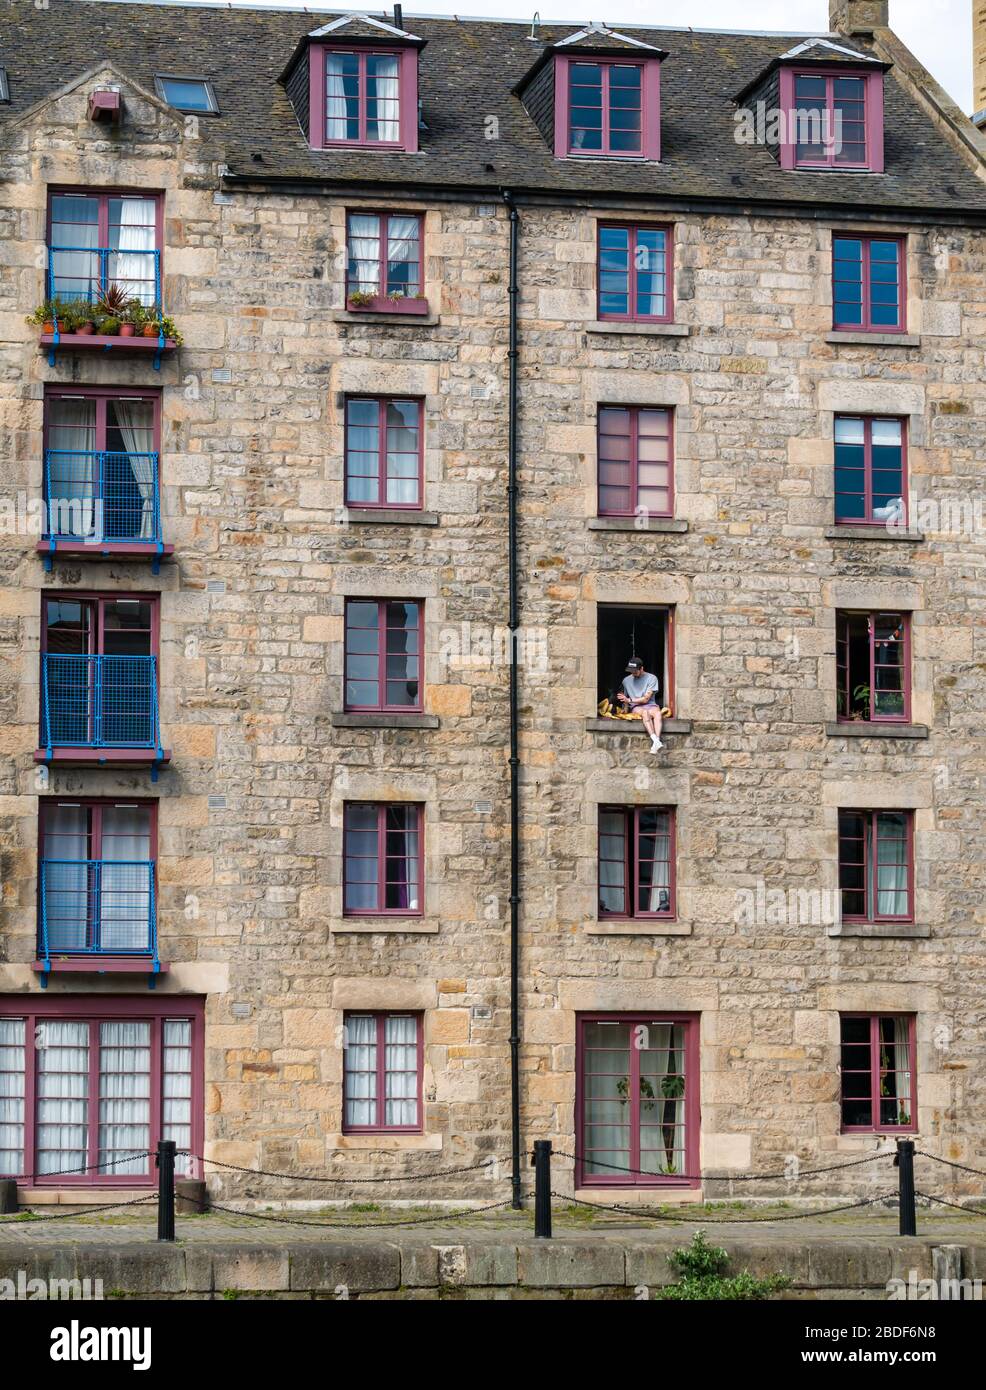 Leith, Edinburgh, Scotland, UK. 8th Apr, 2020. Covid-19 lockdown: on one of the warmest sunny days so far this year with people in lockdown. A man and his dog sit precariously in an open 3rd floor window in the Cooperage warehouse converted into flats on The Shore along the Water of Leith Stock Photo